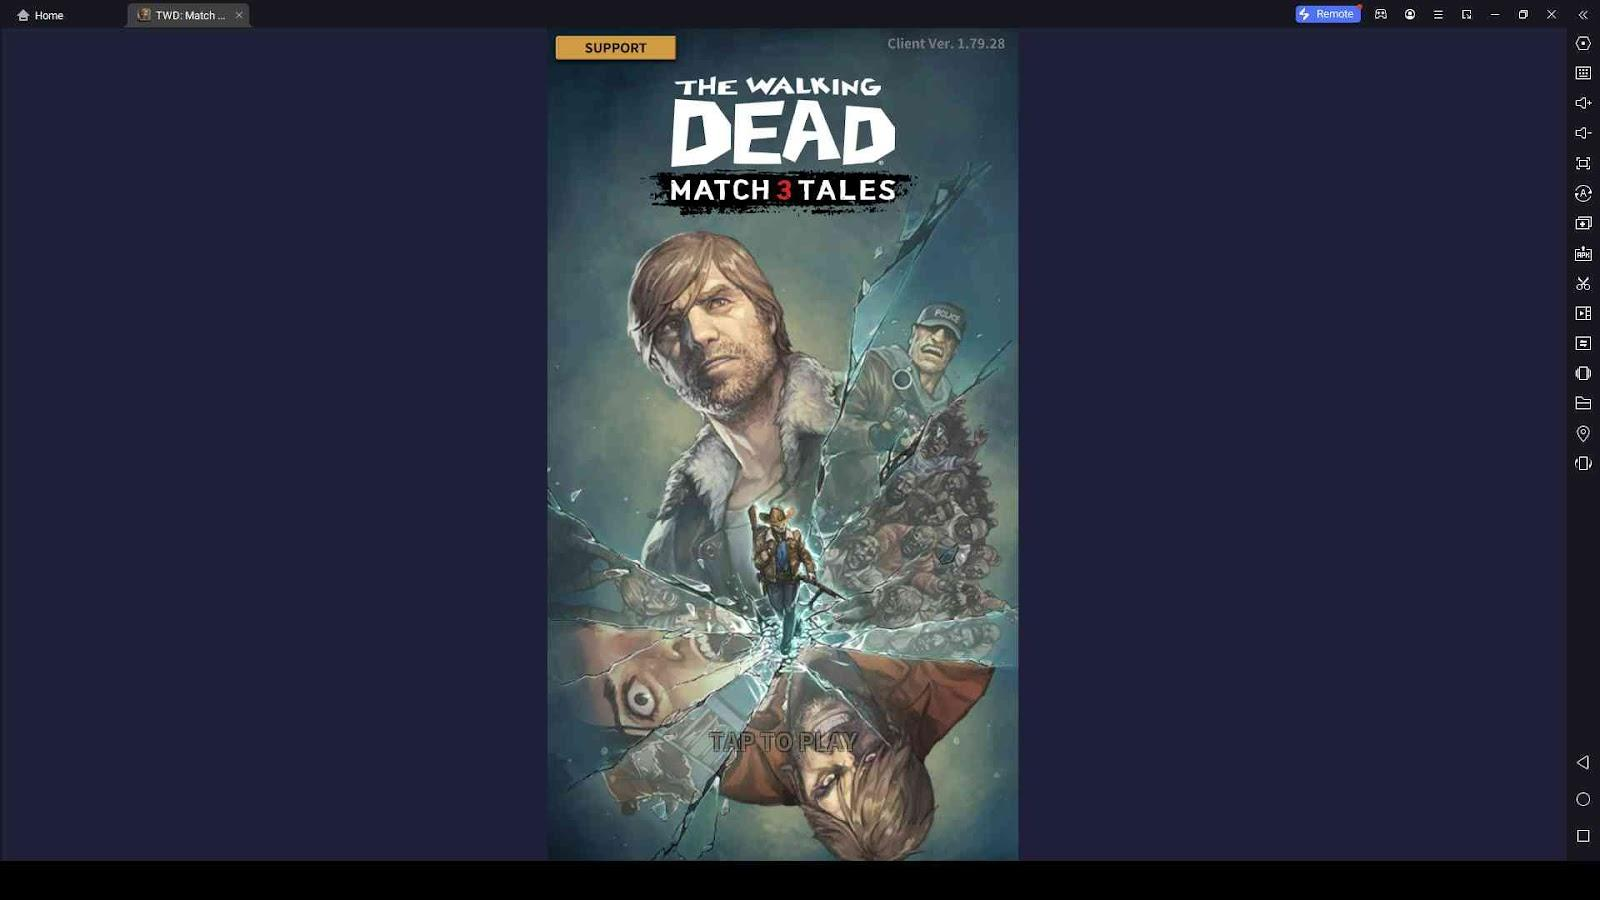 The Walking Dead Match 3 Tales Codes